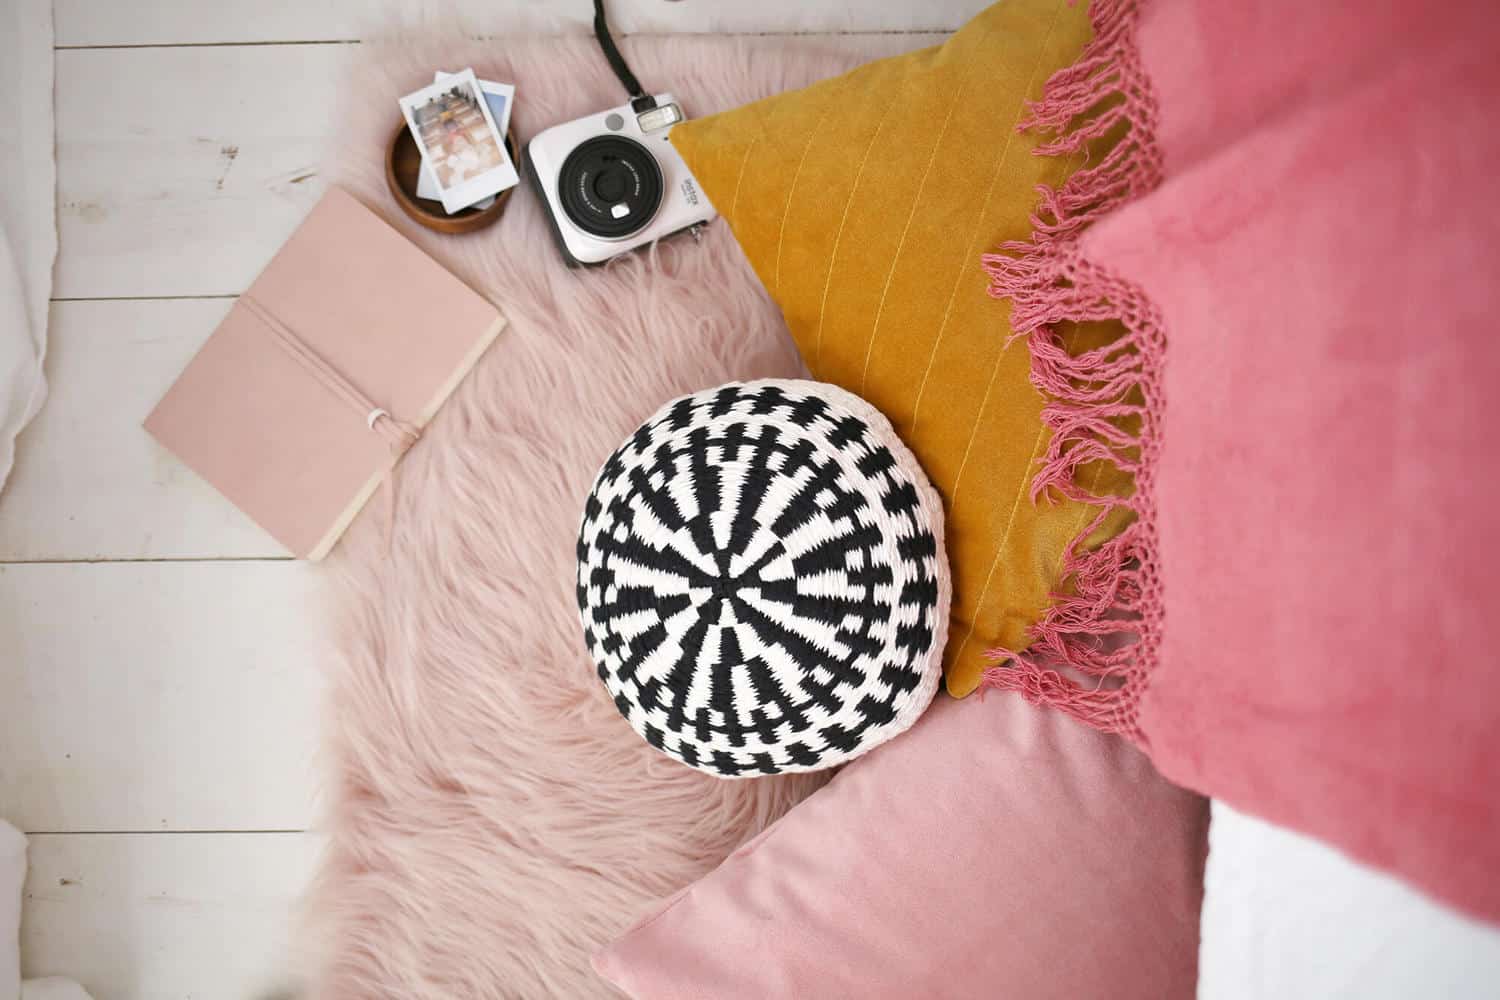 https://abeautifulmess.com/wp-content/uploads/2019/03/Weave-a-round-pillow-with-this-weaving-tutorial-on-A-Beautiful-Mess.jpg